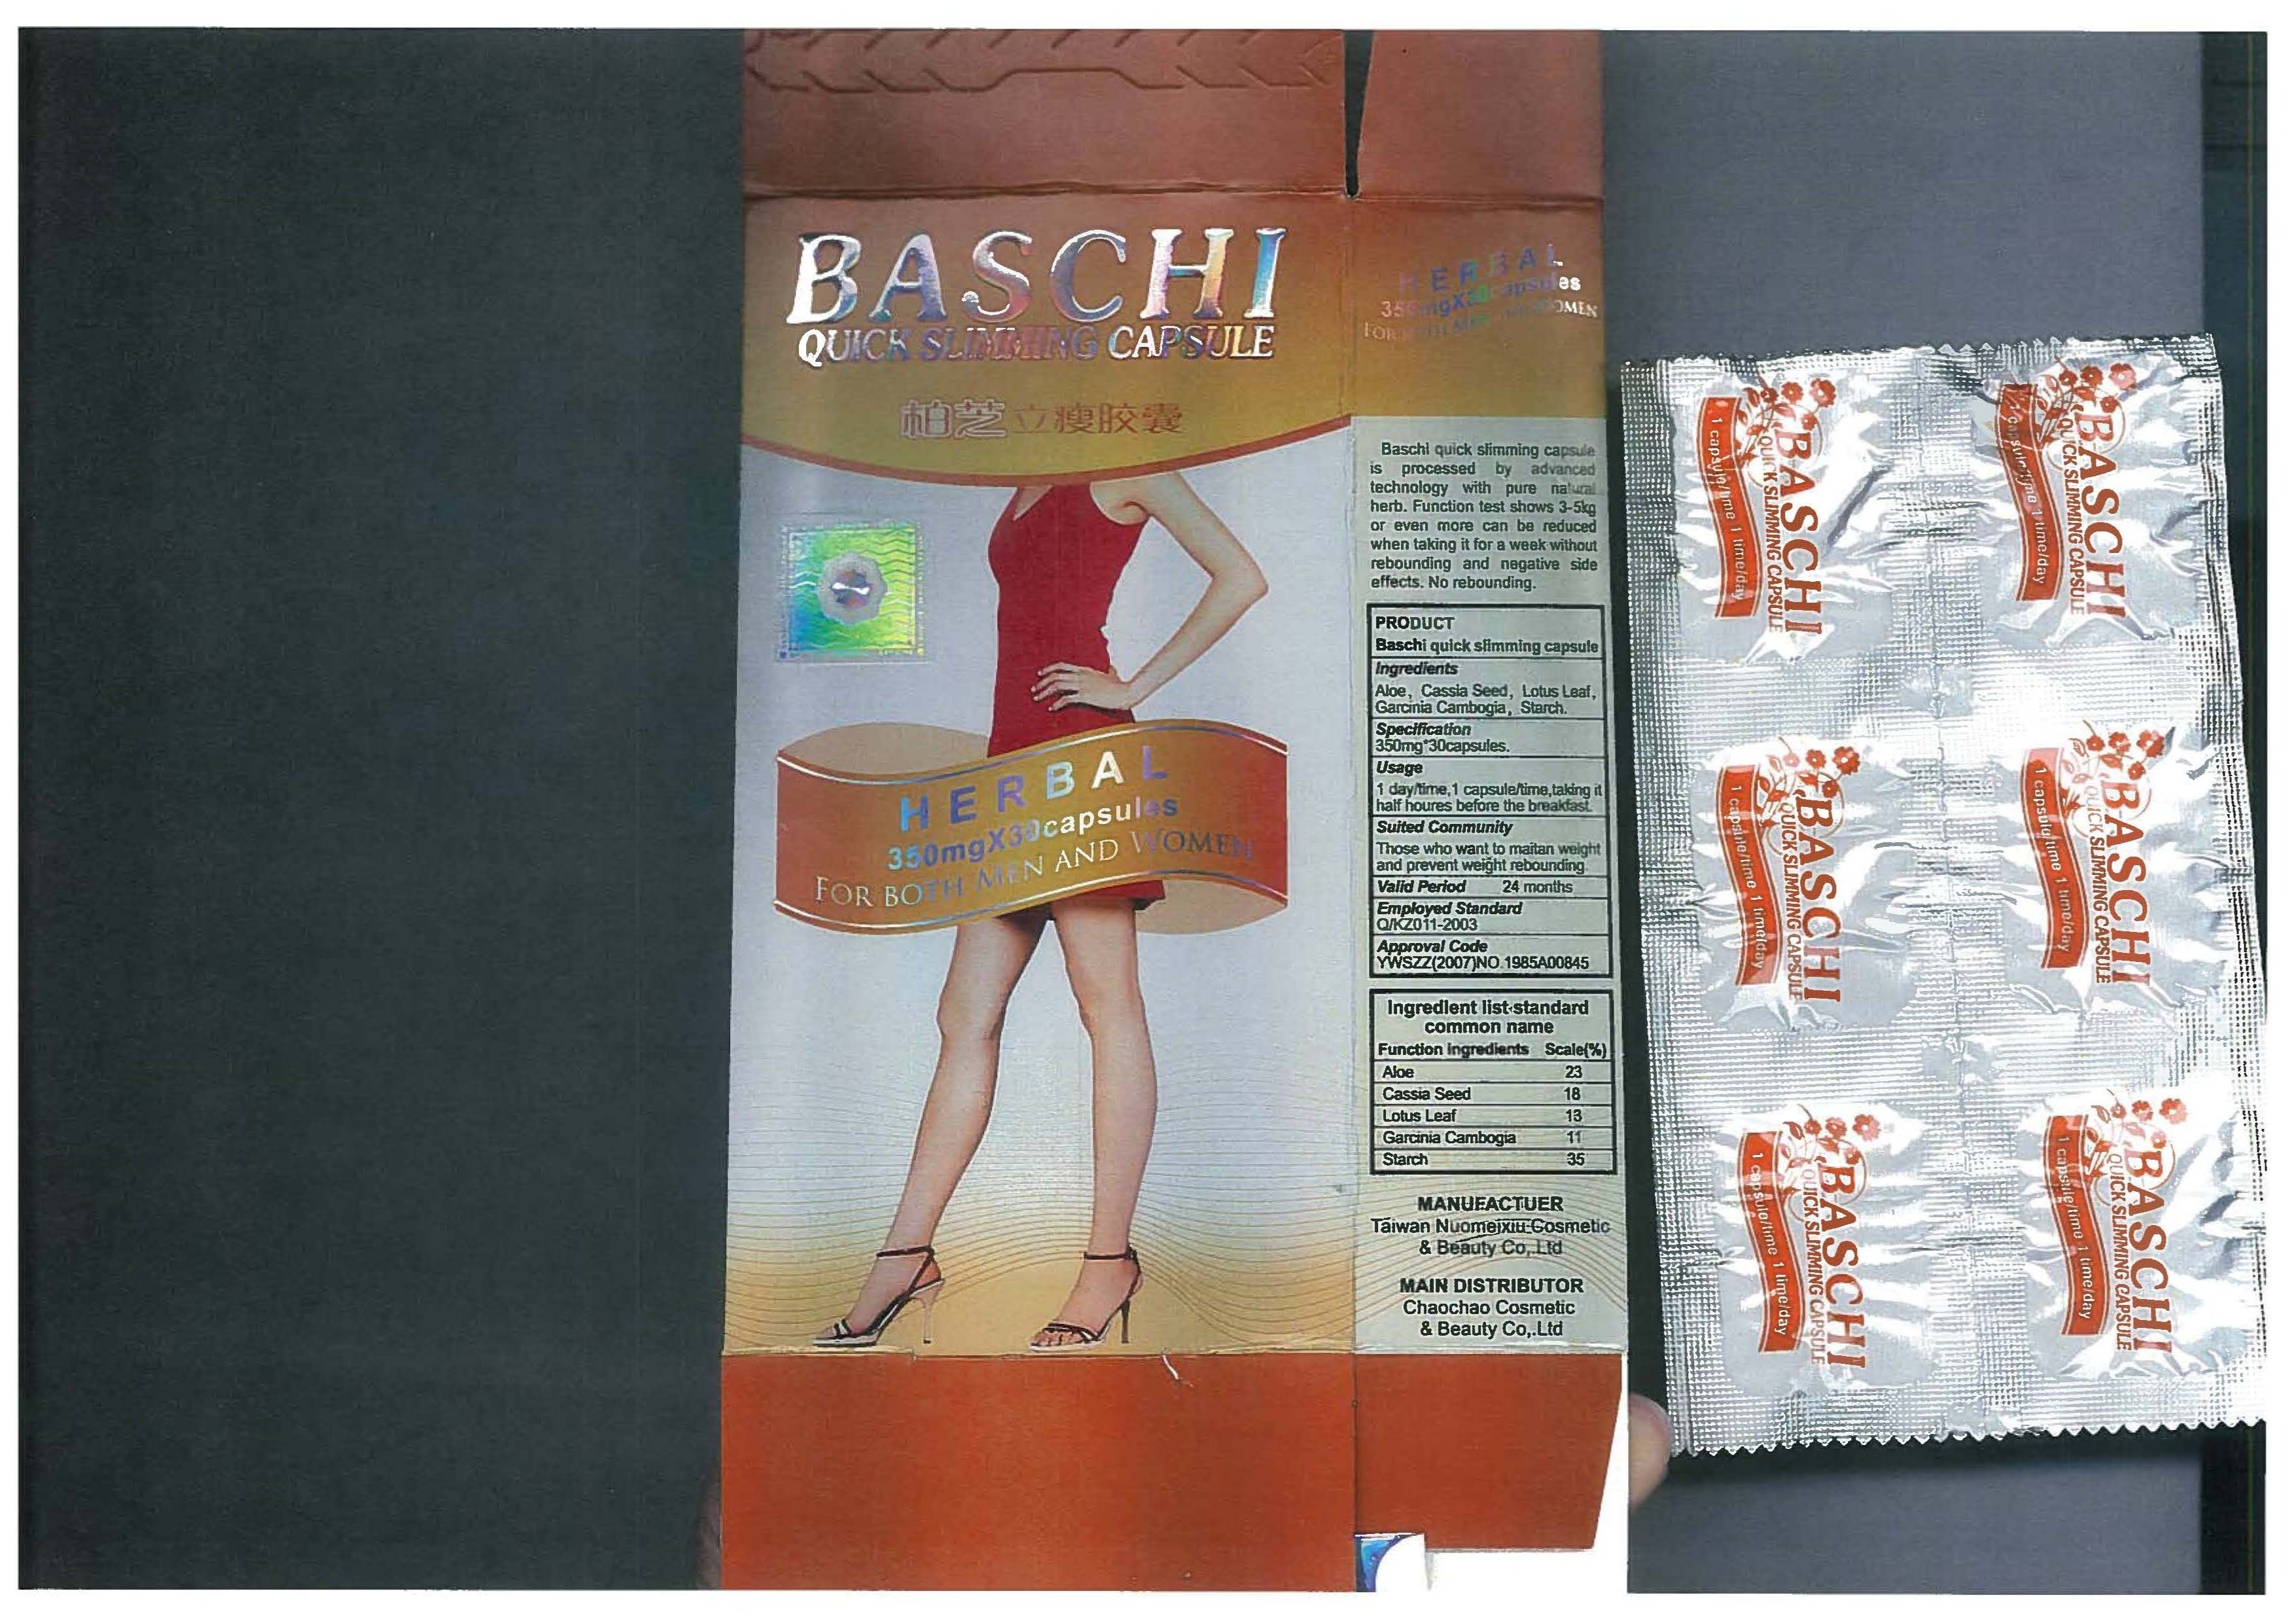 Image of the illigal product: Baschi Quick Slimming Capsule